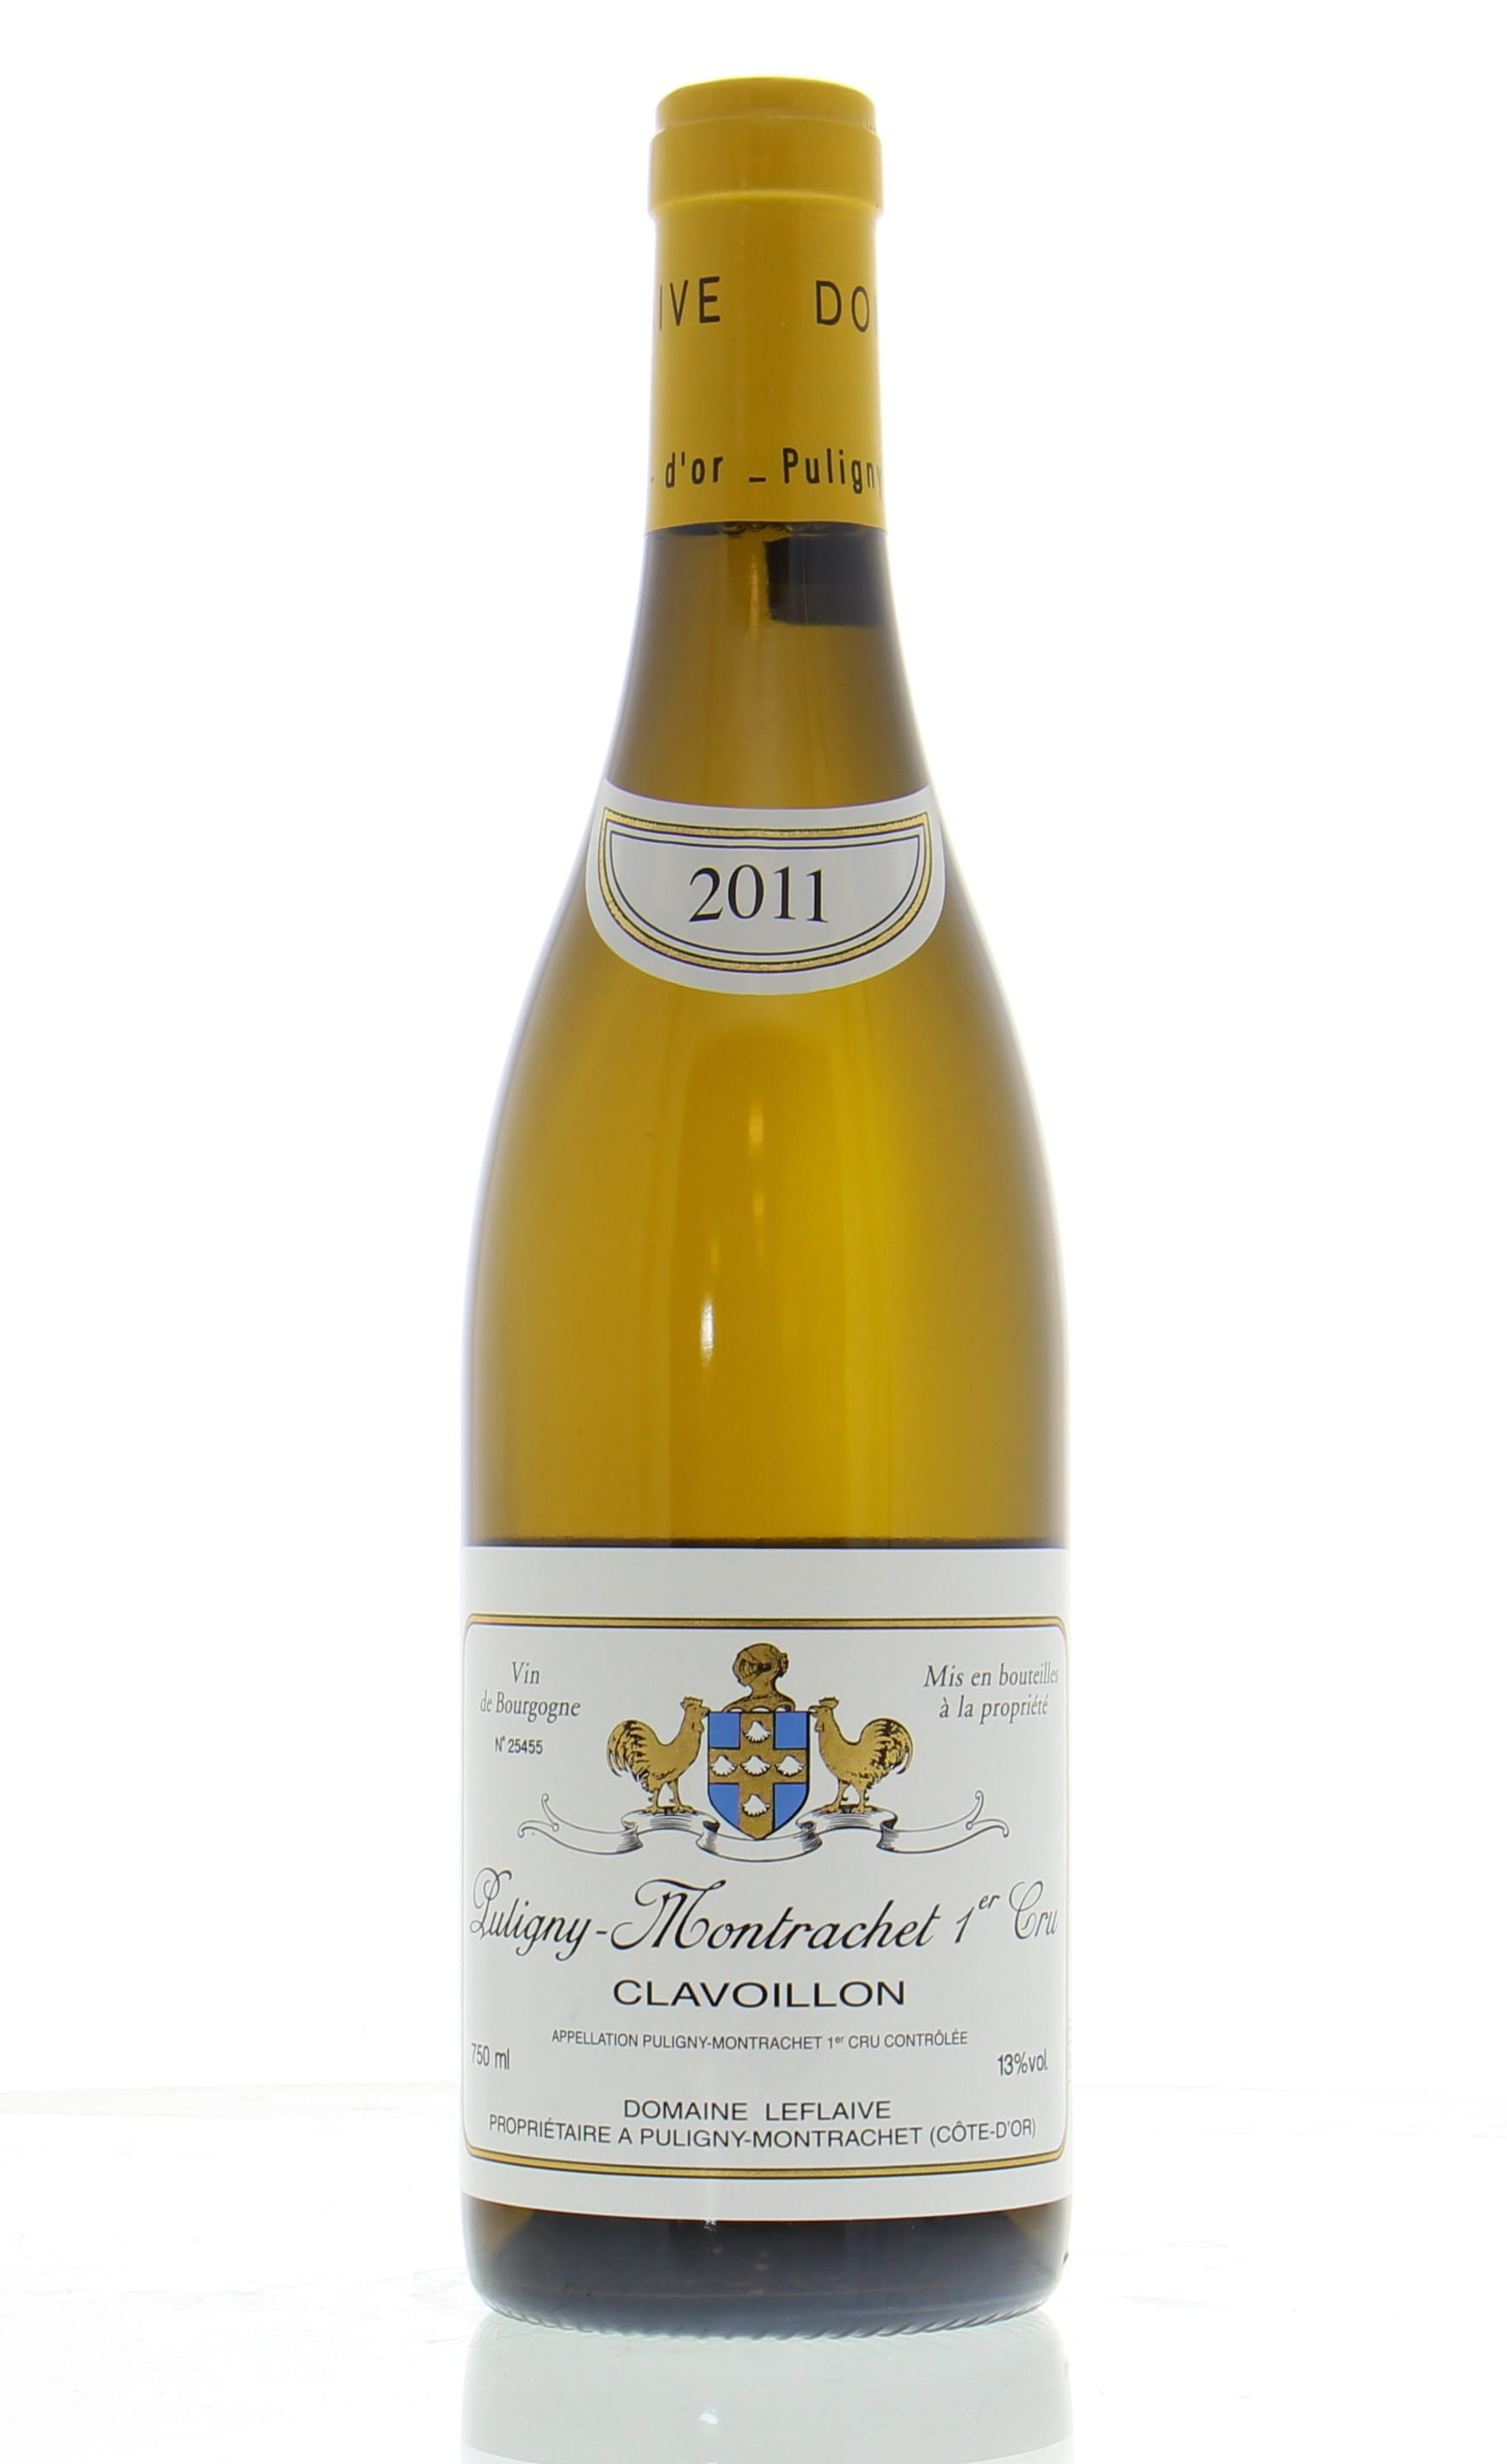 Domaine Leflaive - Puligny Montrachet Clavoillon 2011 From Original Wooden Case